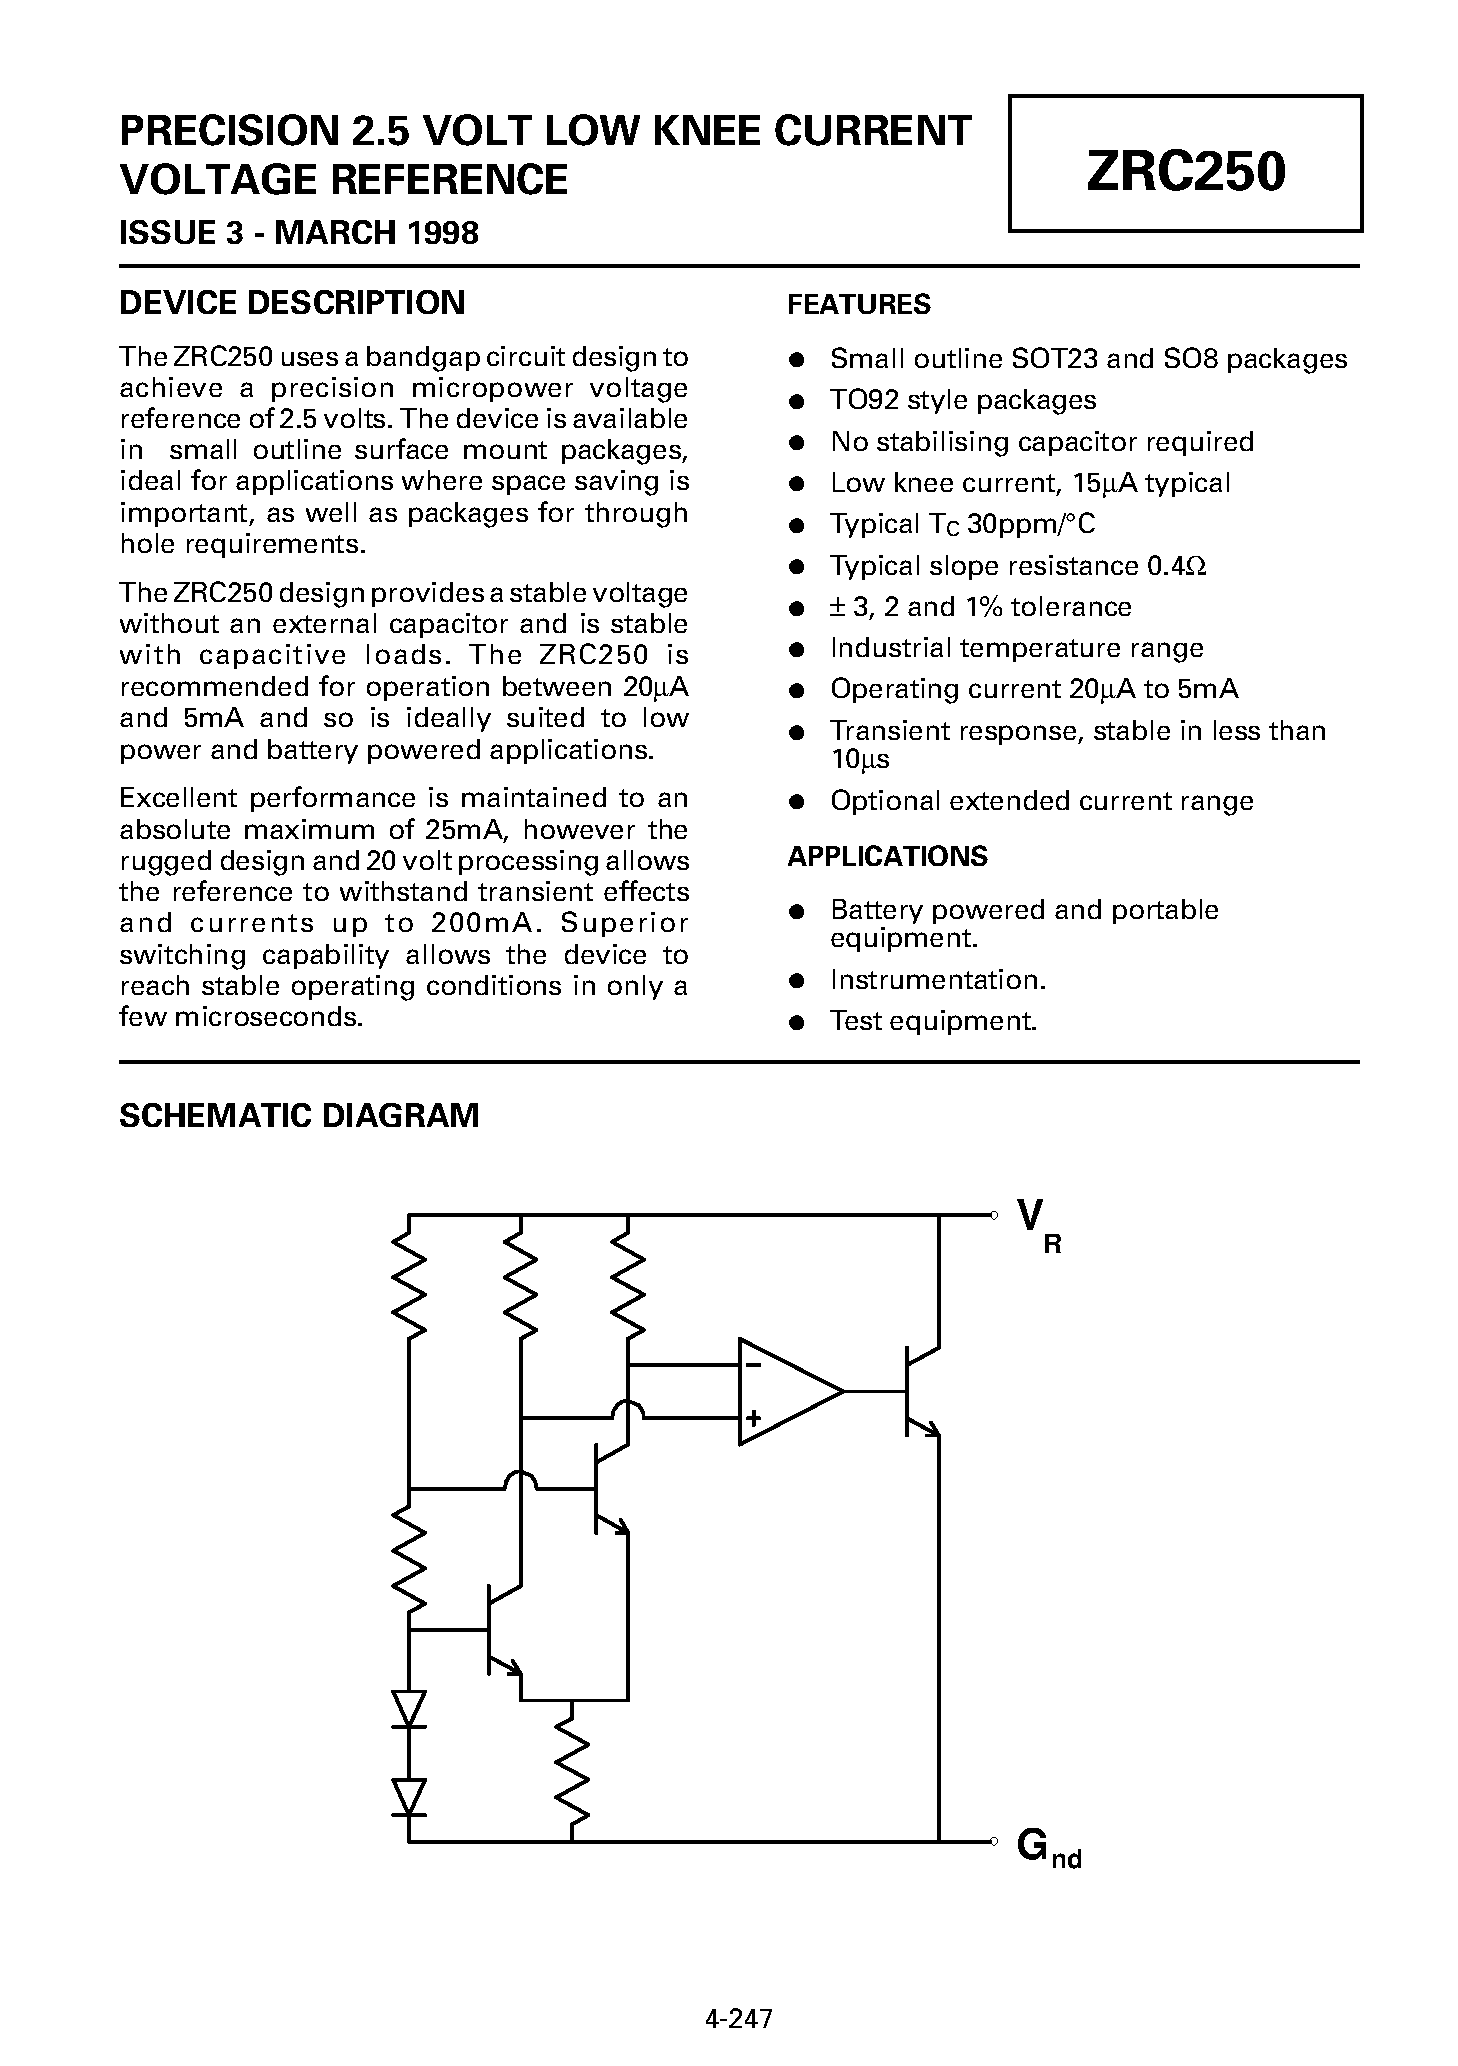 Datasheet ZRC250N803 - PRECISION 2.5 VOLT LOW KNEE CURRENT VOLTAGE REFERENCE page 1